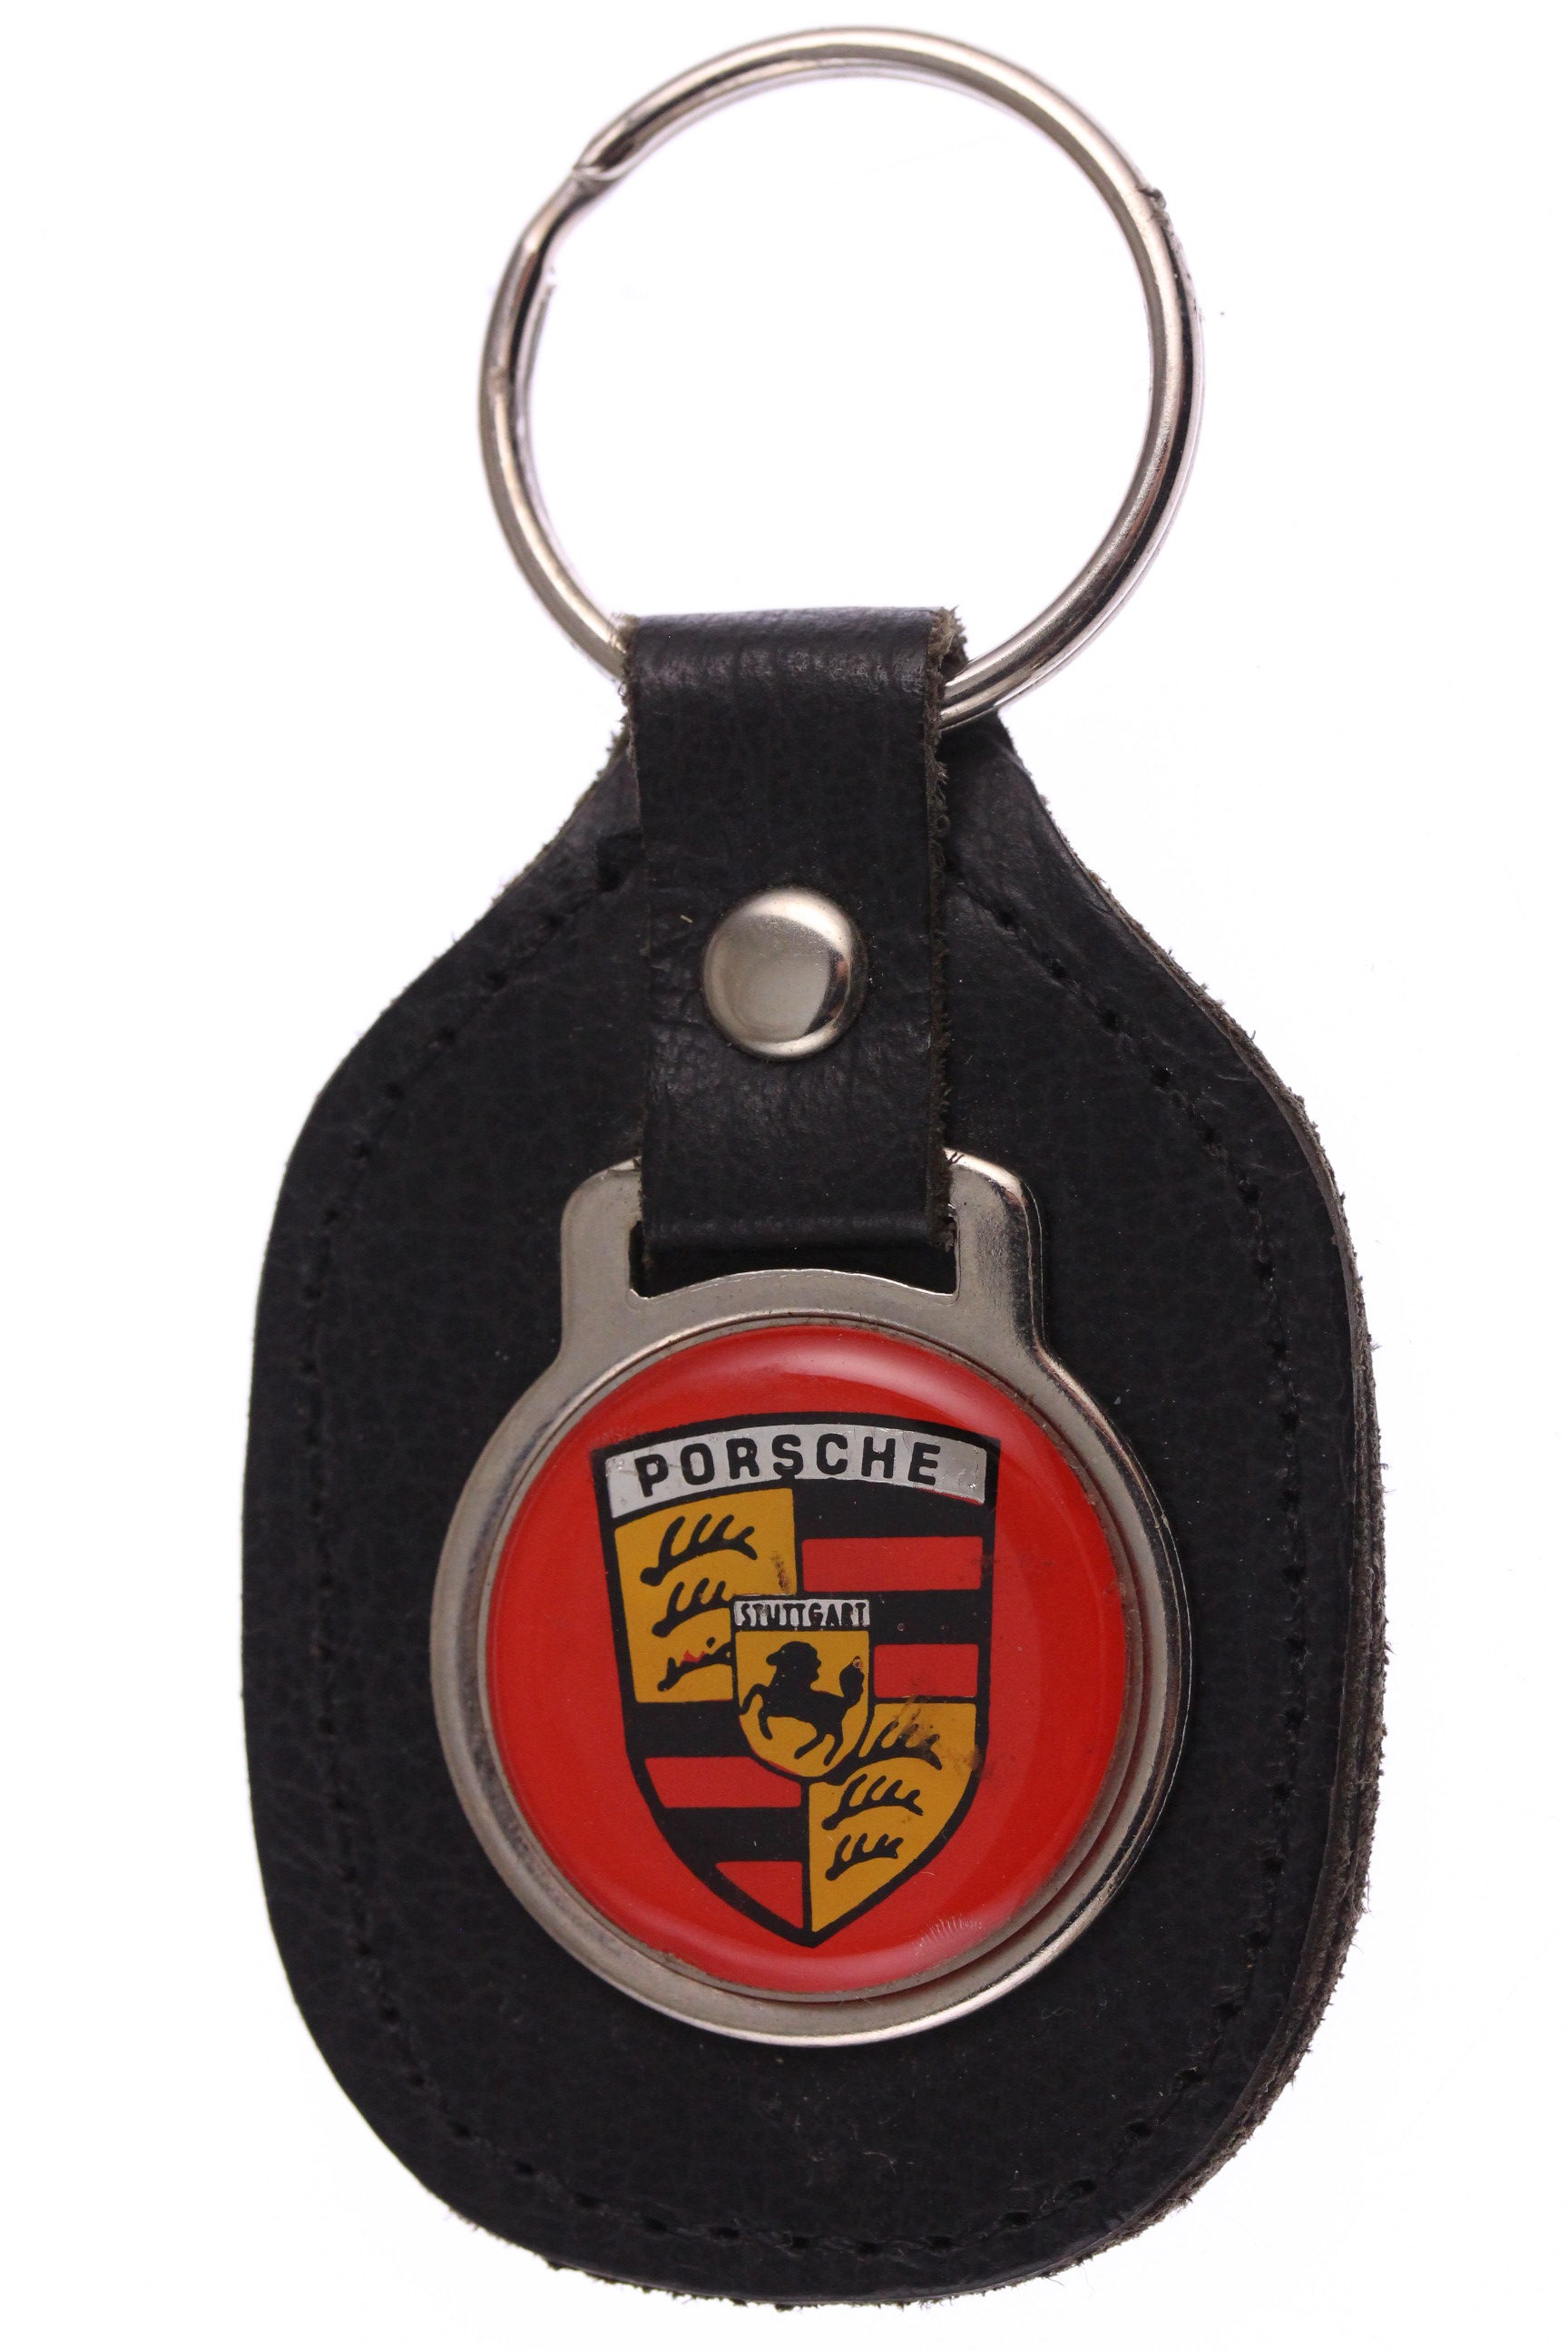 AUTHENTIC PORSCHE KEYCHAIN IN CLASSIC BLACK KEY RING